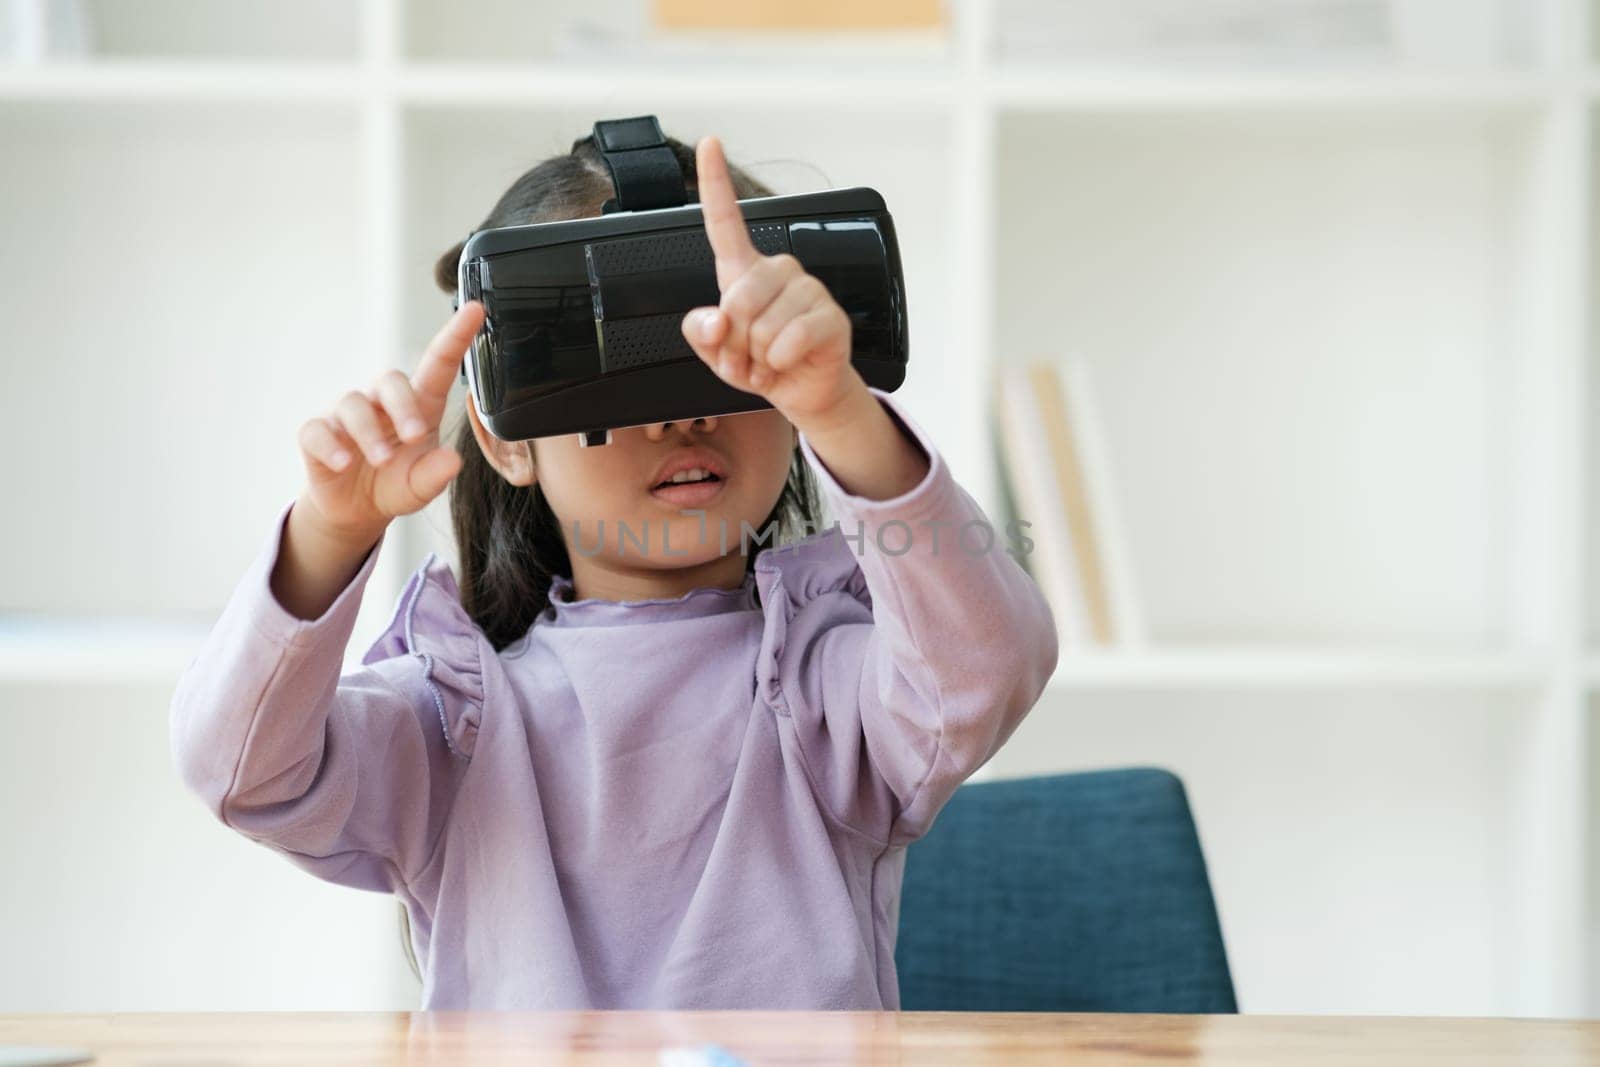 An elementary aged girl uses a virtual reality headset to enhance learning experience with excitement. Marketing for VR products, educational technology content.